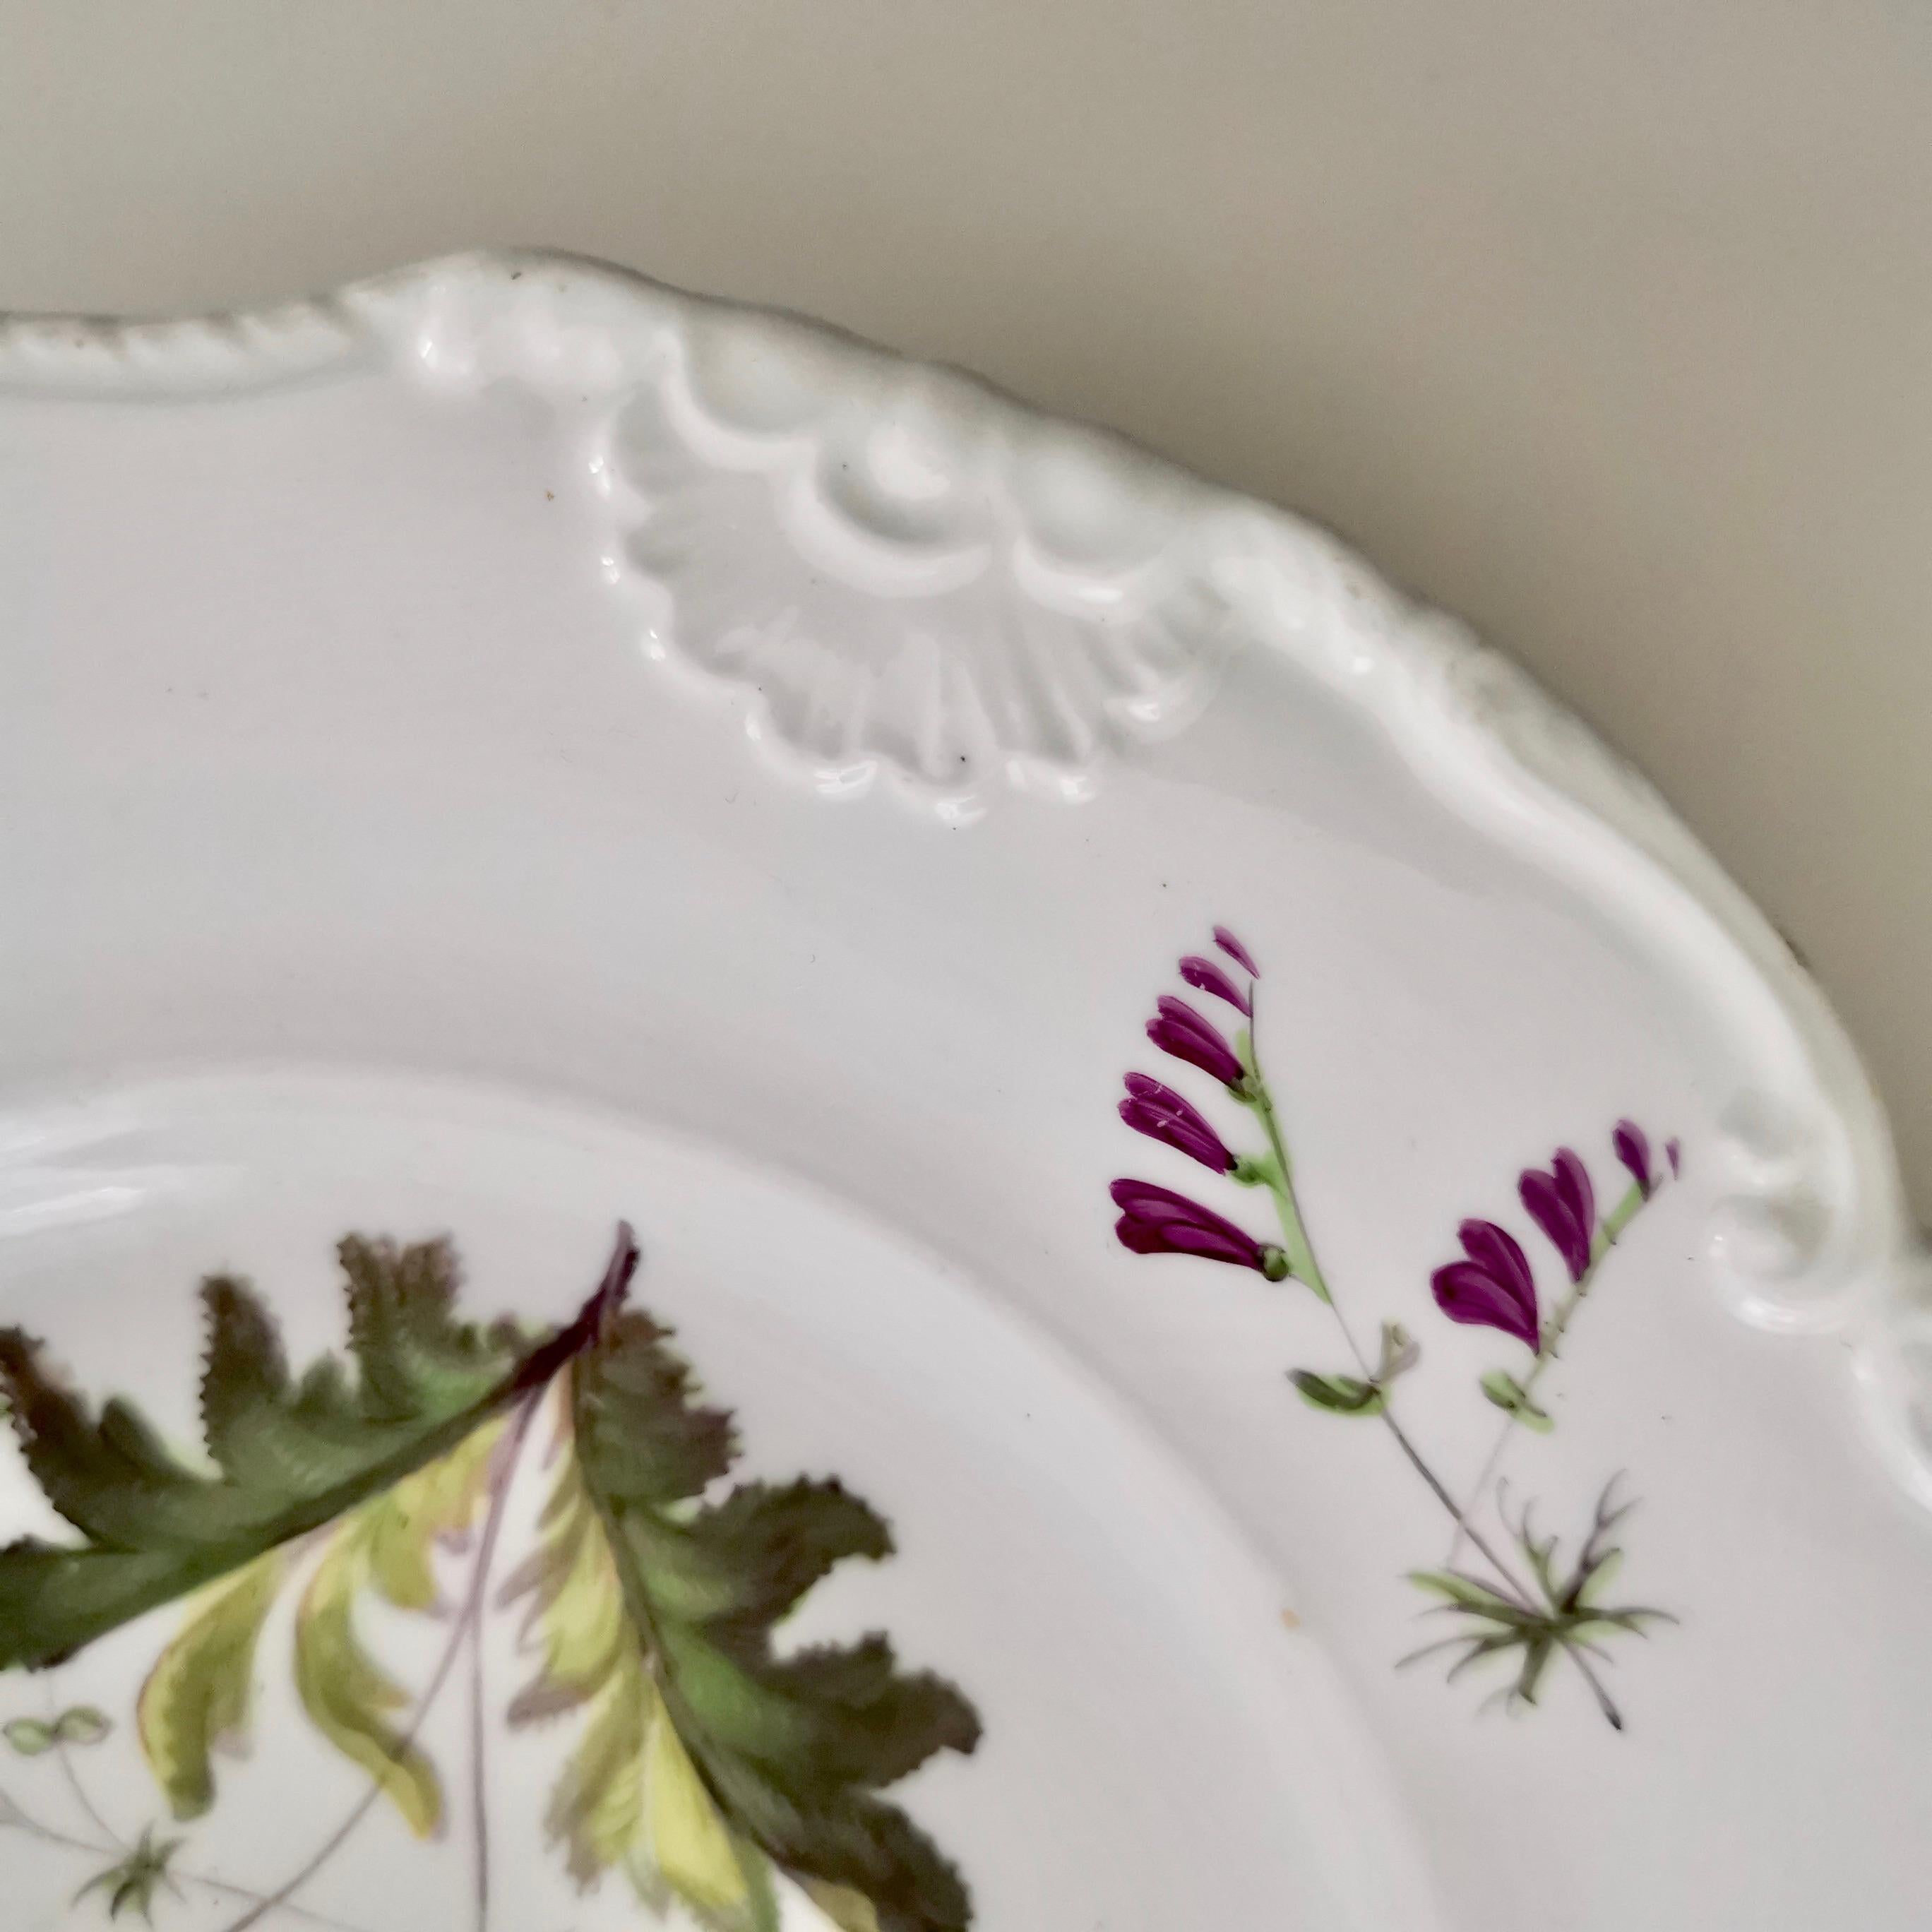 New Hall Porcelain Plate, White with Flowers, Inverted Shell, Regency circa 1820 6